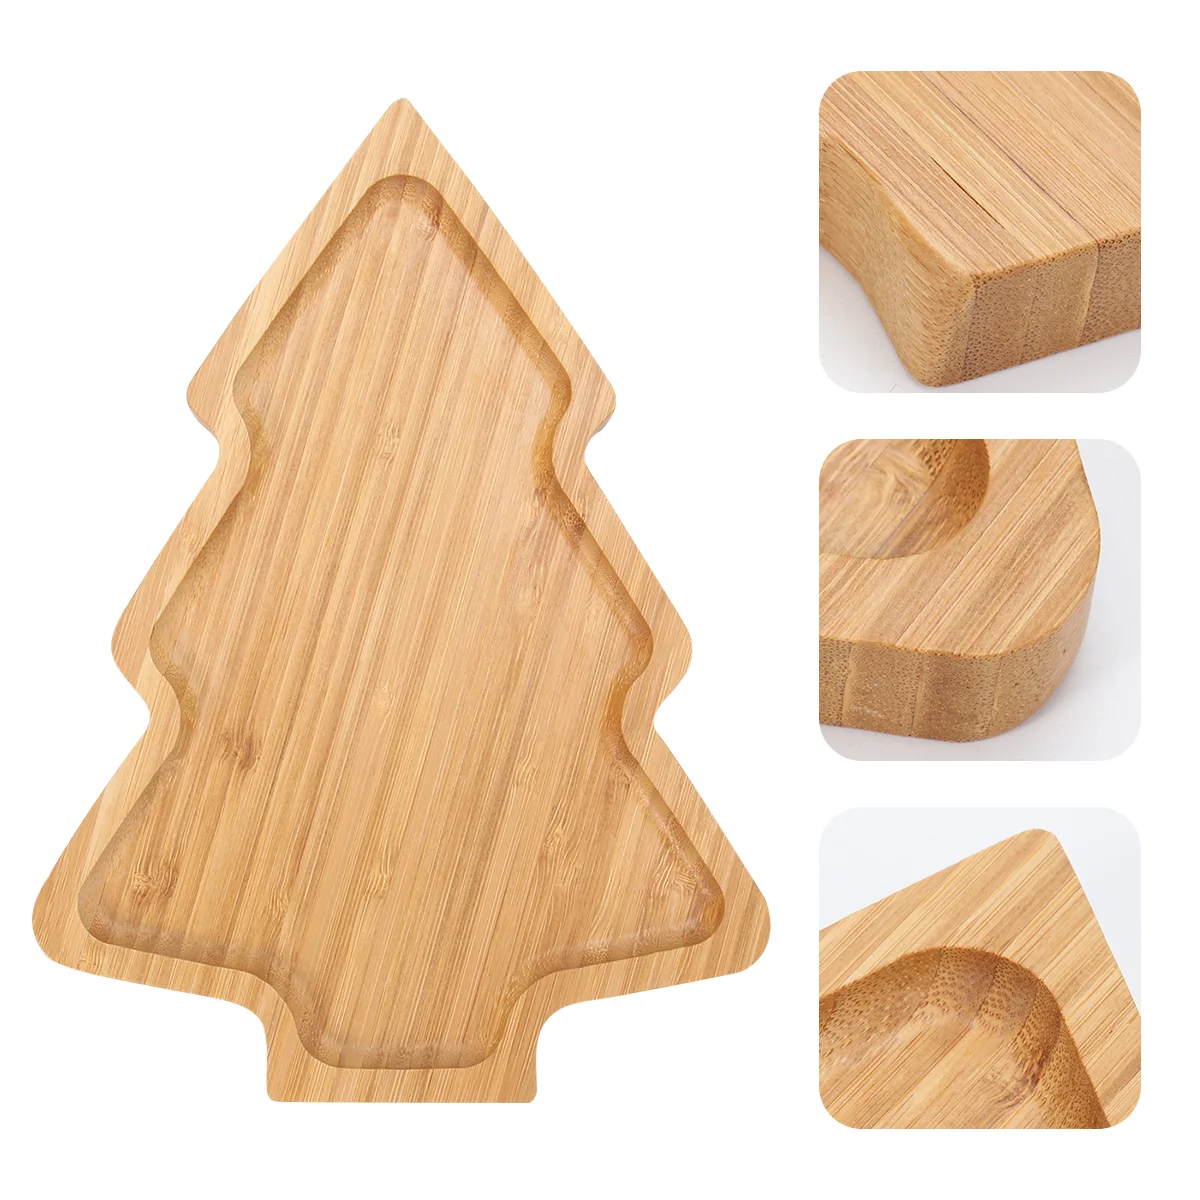 

Christmas Wooden Dish Service Plate Cartoon Home Dish Bamboo Christmas Tree Tray Plate for Food Appetizers Desserts Snacks Sushi